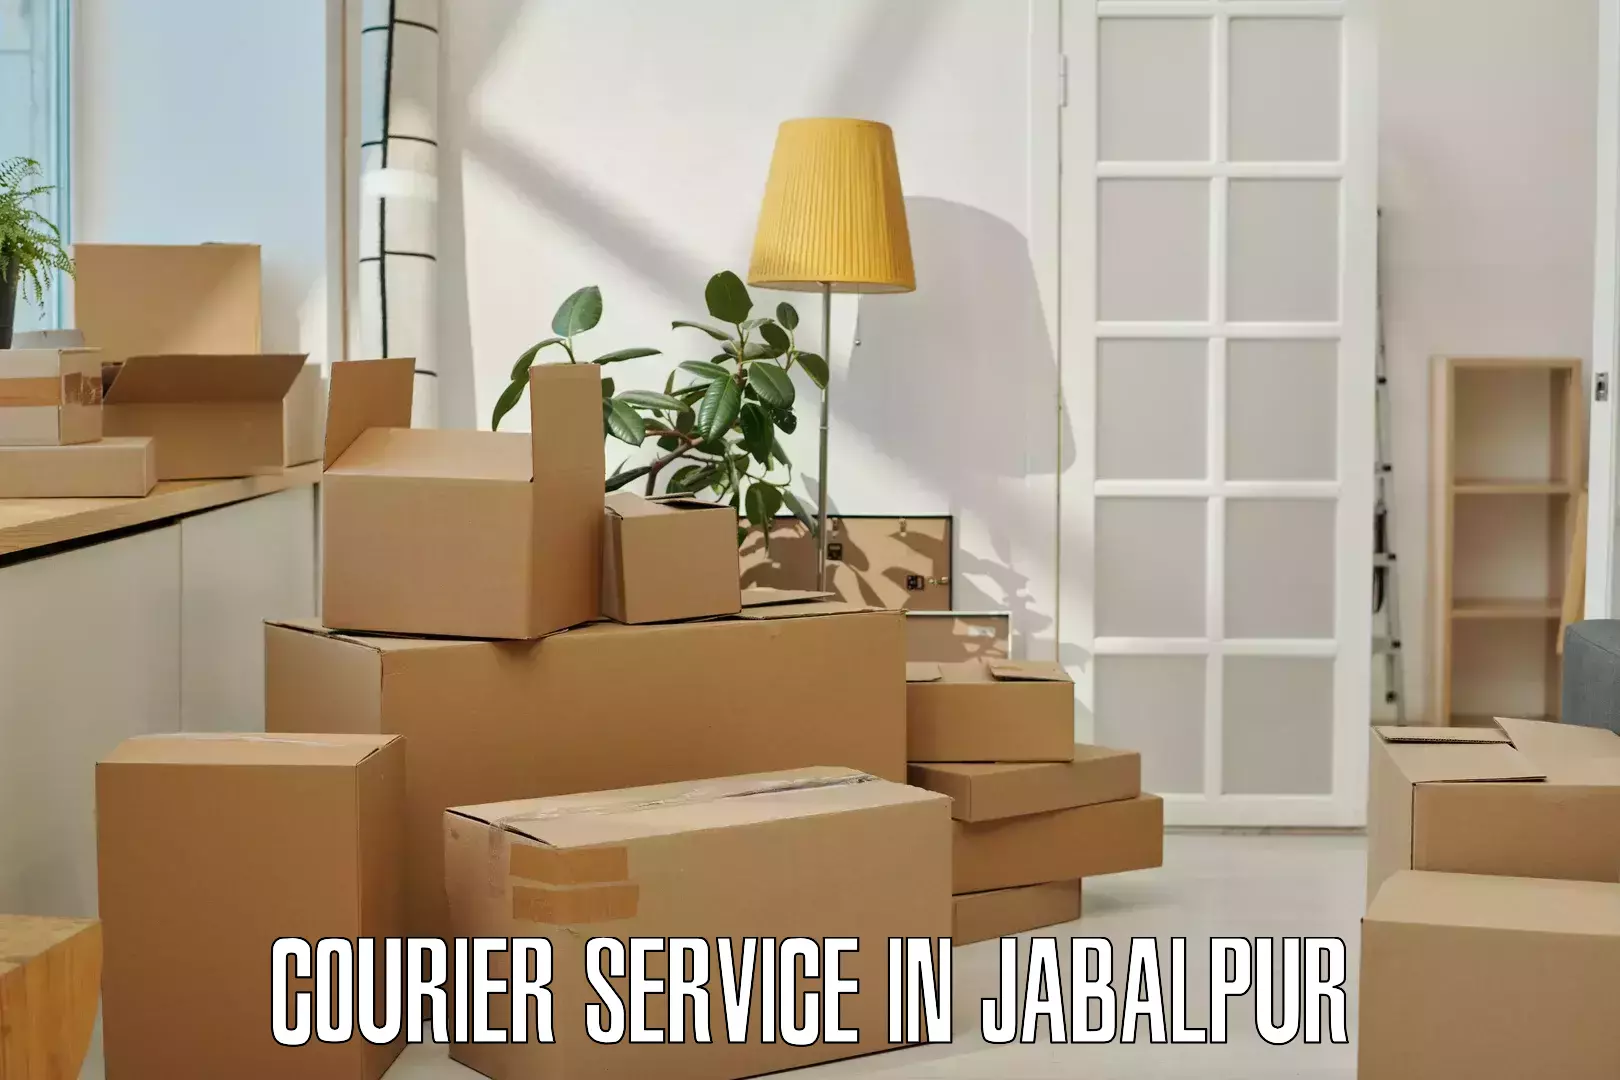 Customer-friendly courier services in Jabalpur